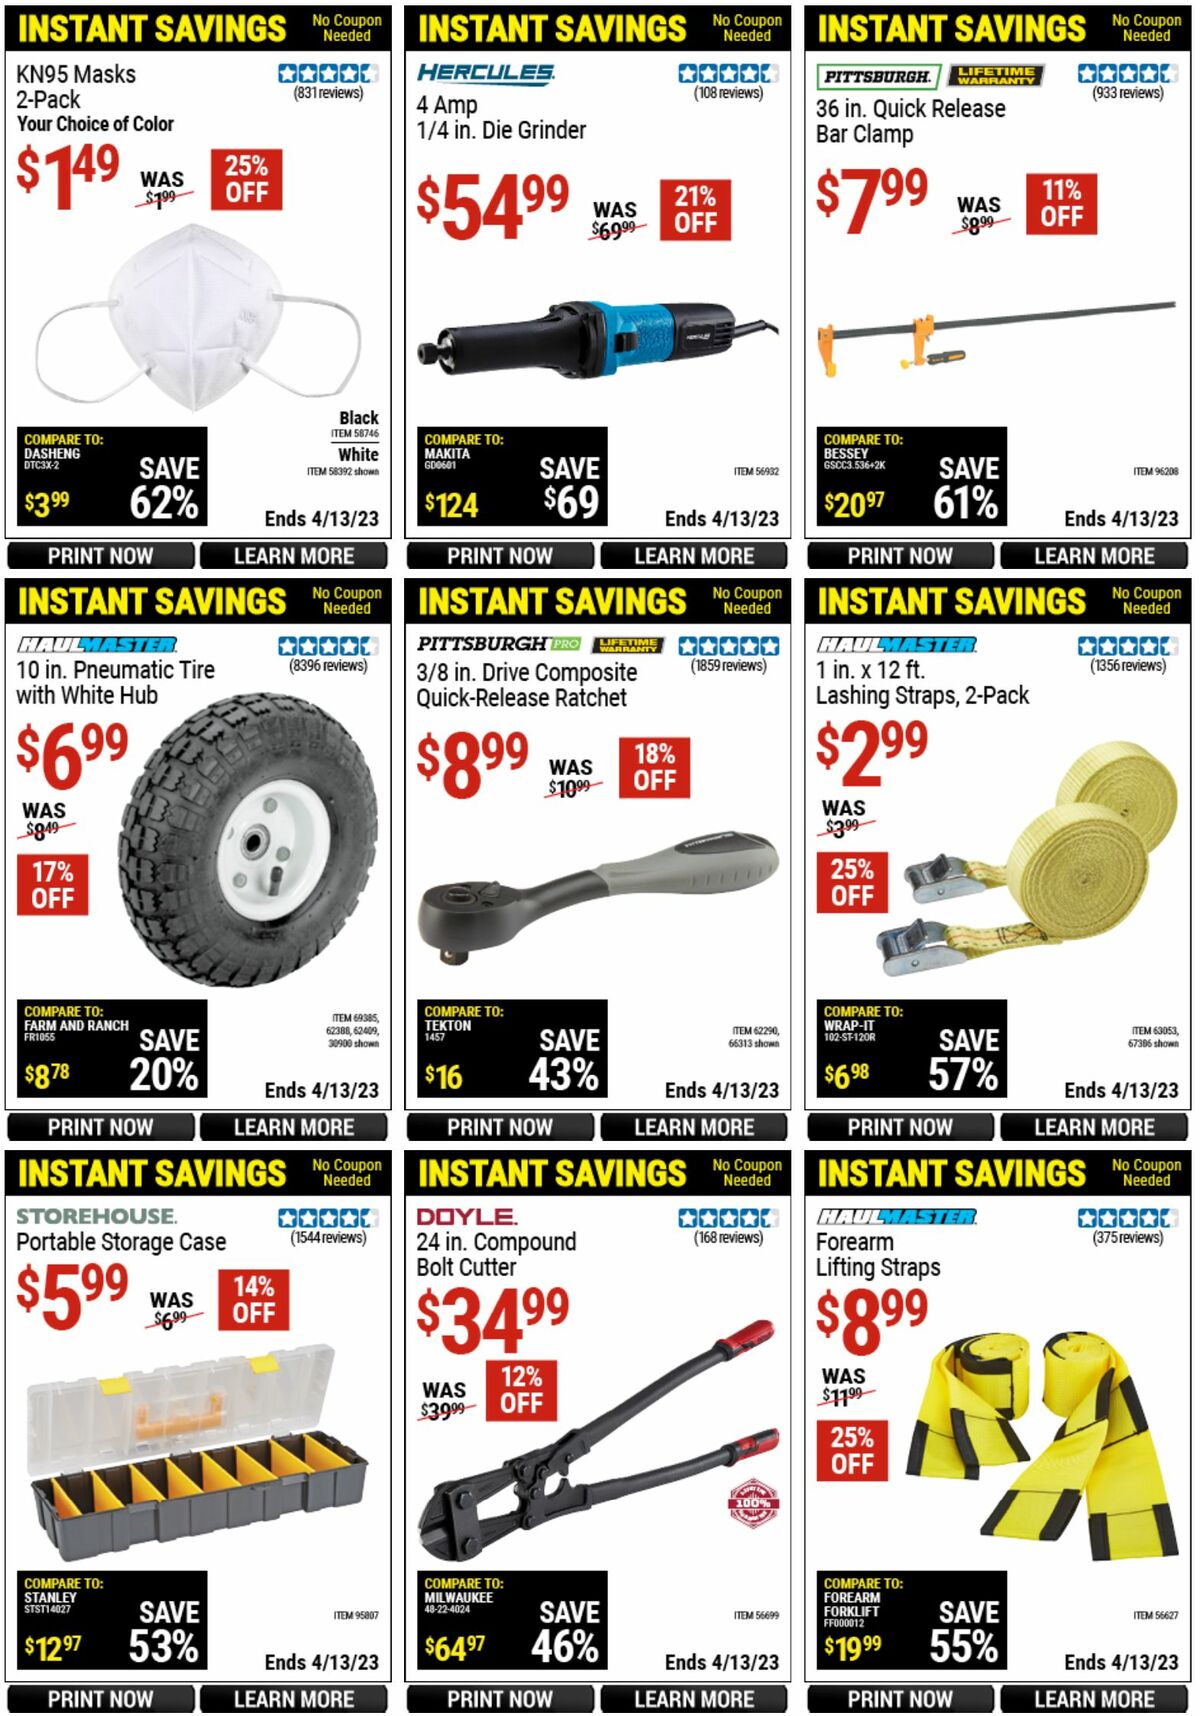 Harbor Freight Tools Weekly Ad from March 14